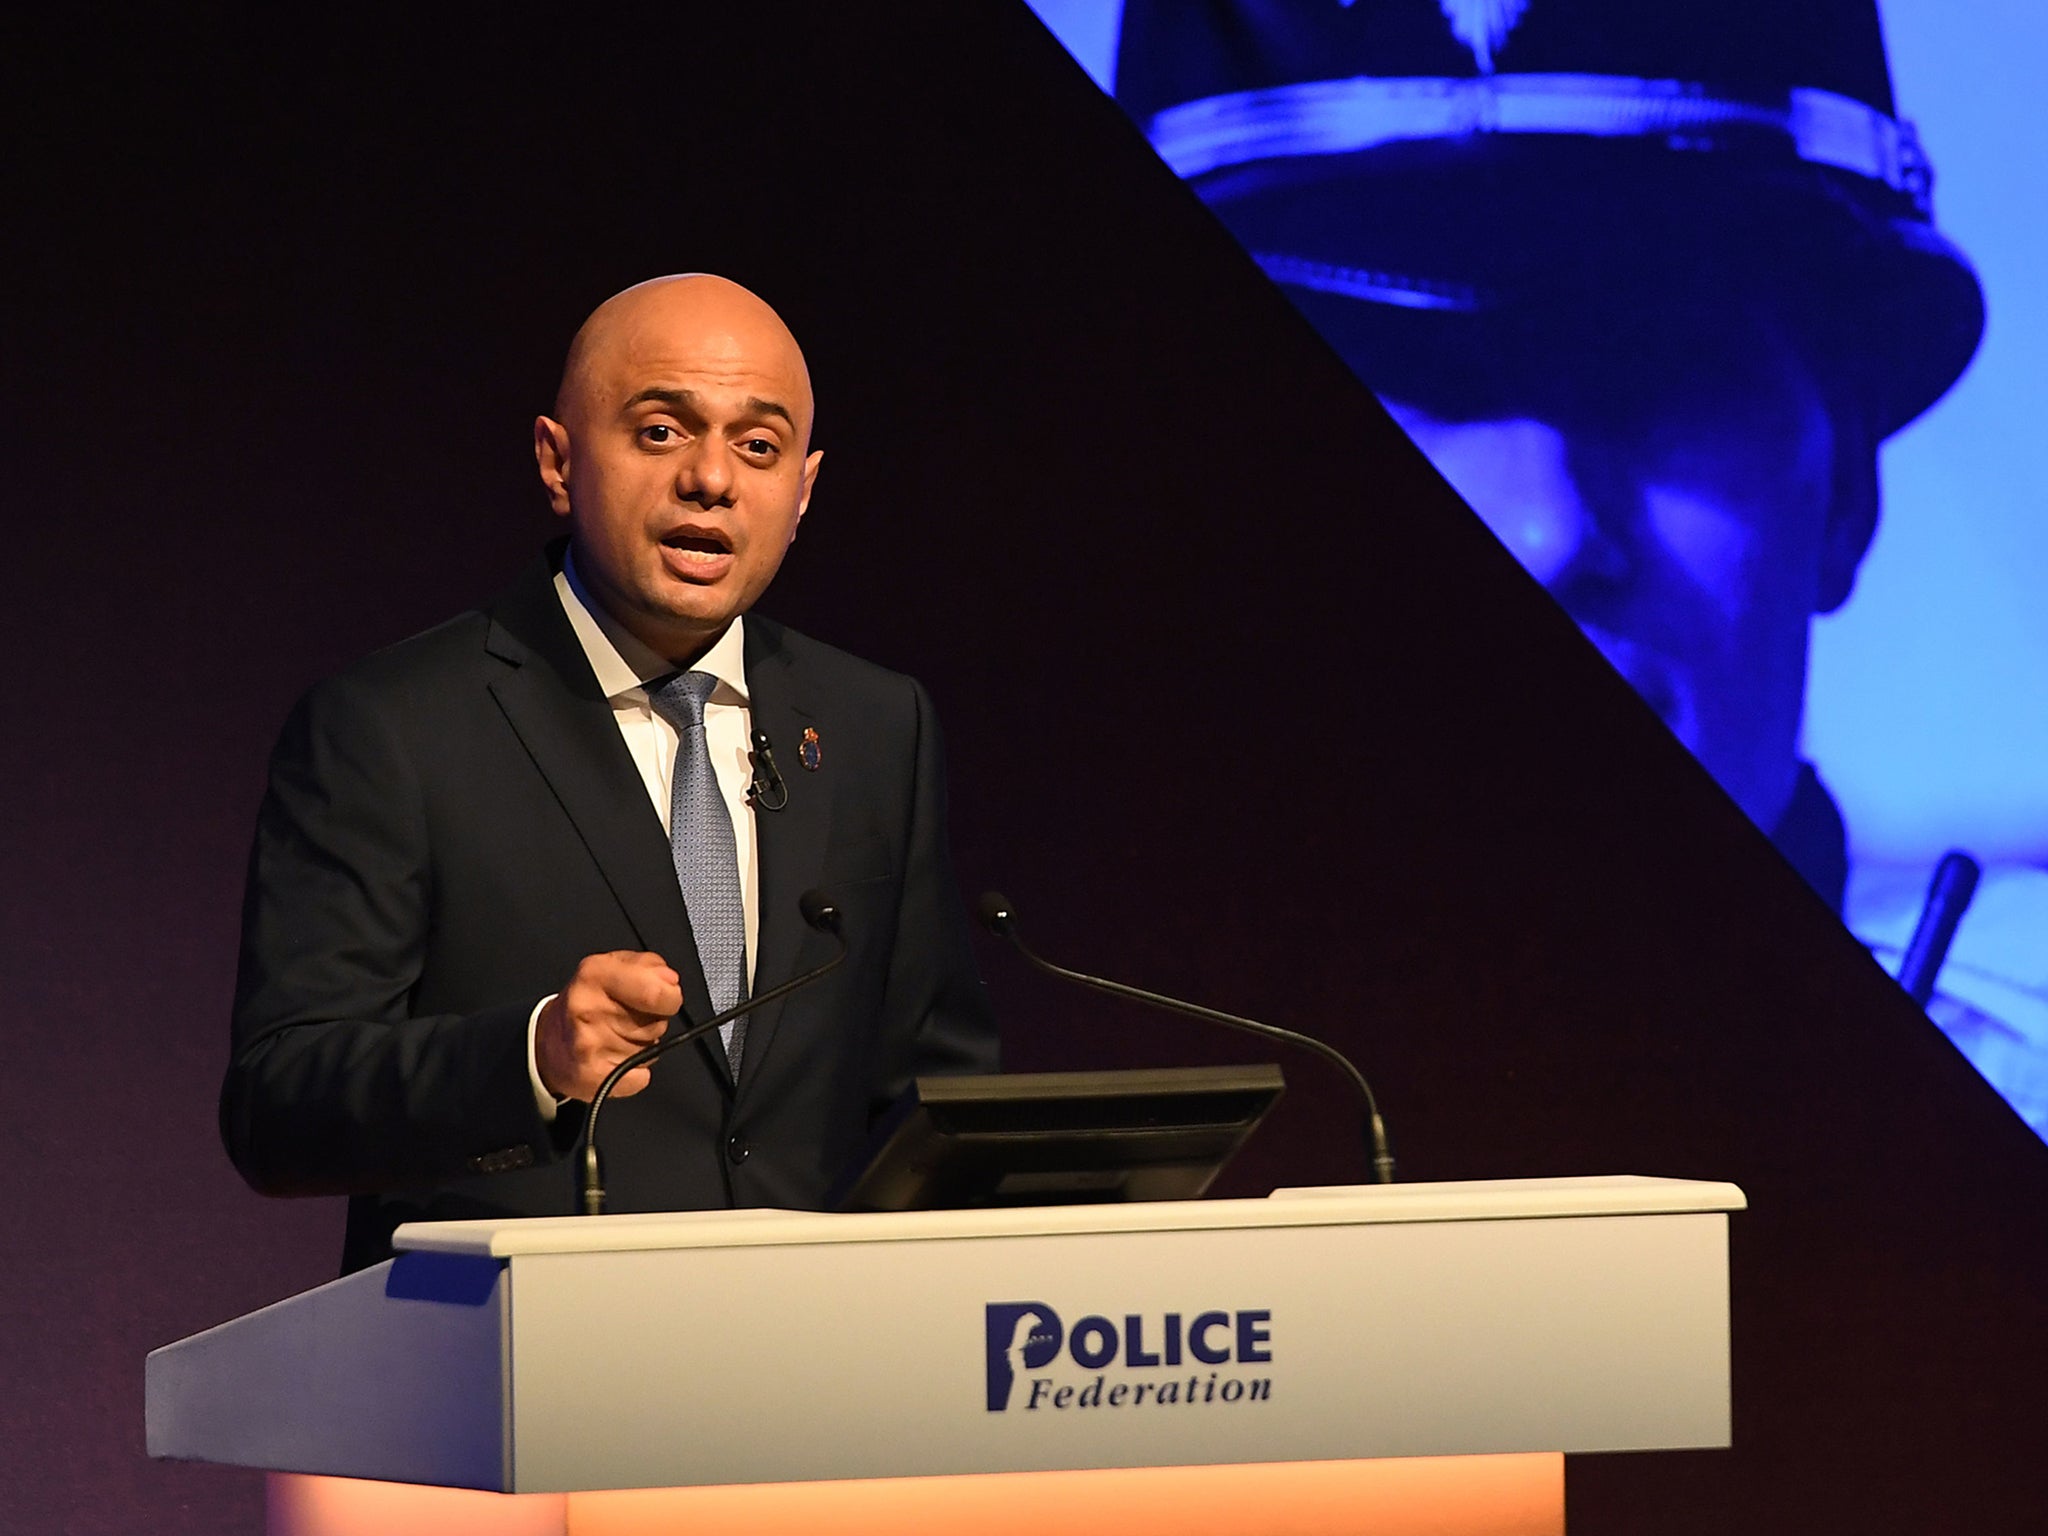 ‘I will prioritise police funding when it comes to the spending review,’ promises Javid